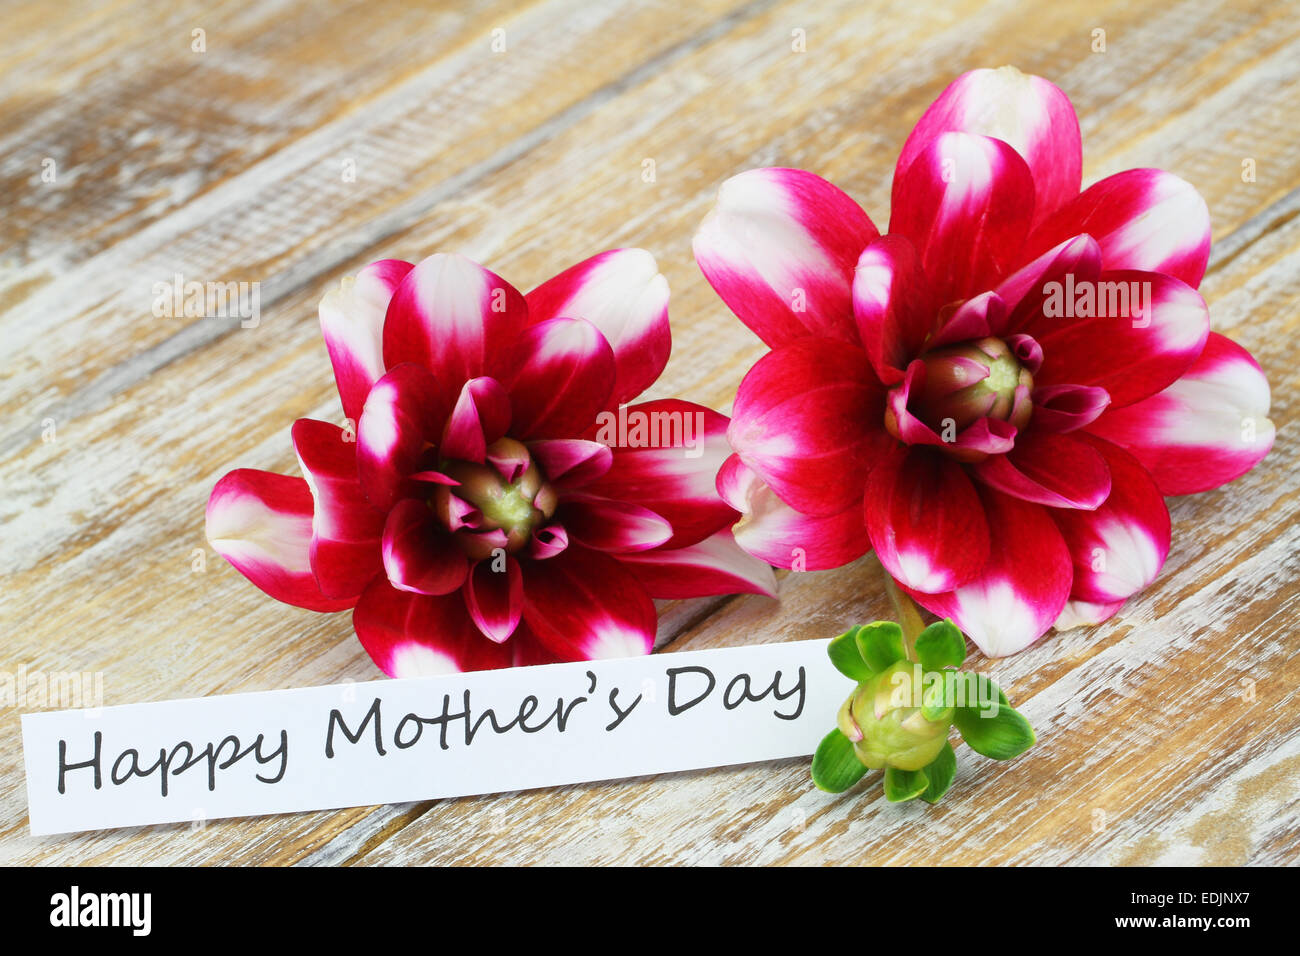 Happy Mother's Day card with dahlia flowers on rustic wooden surface Stock Photo